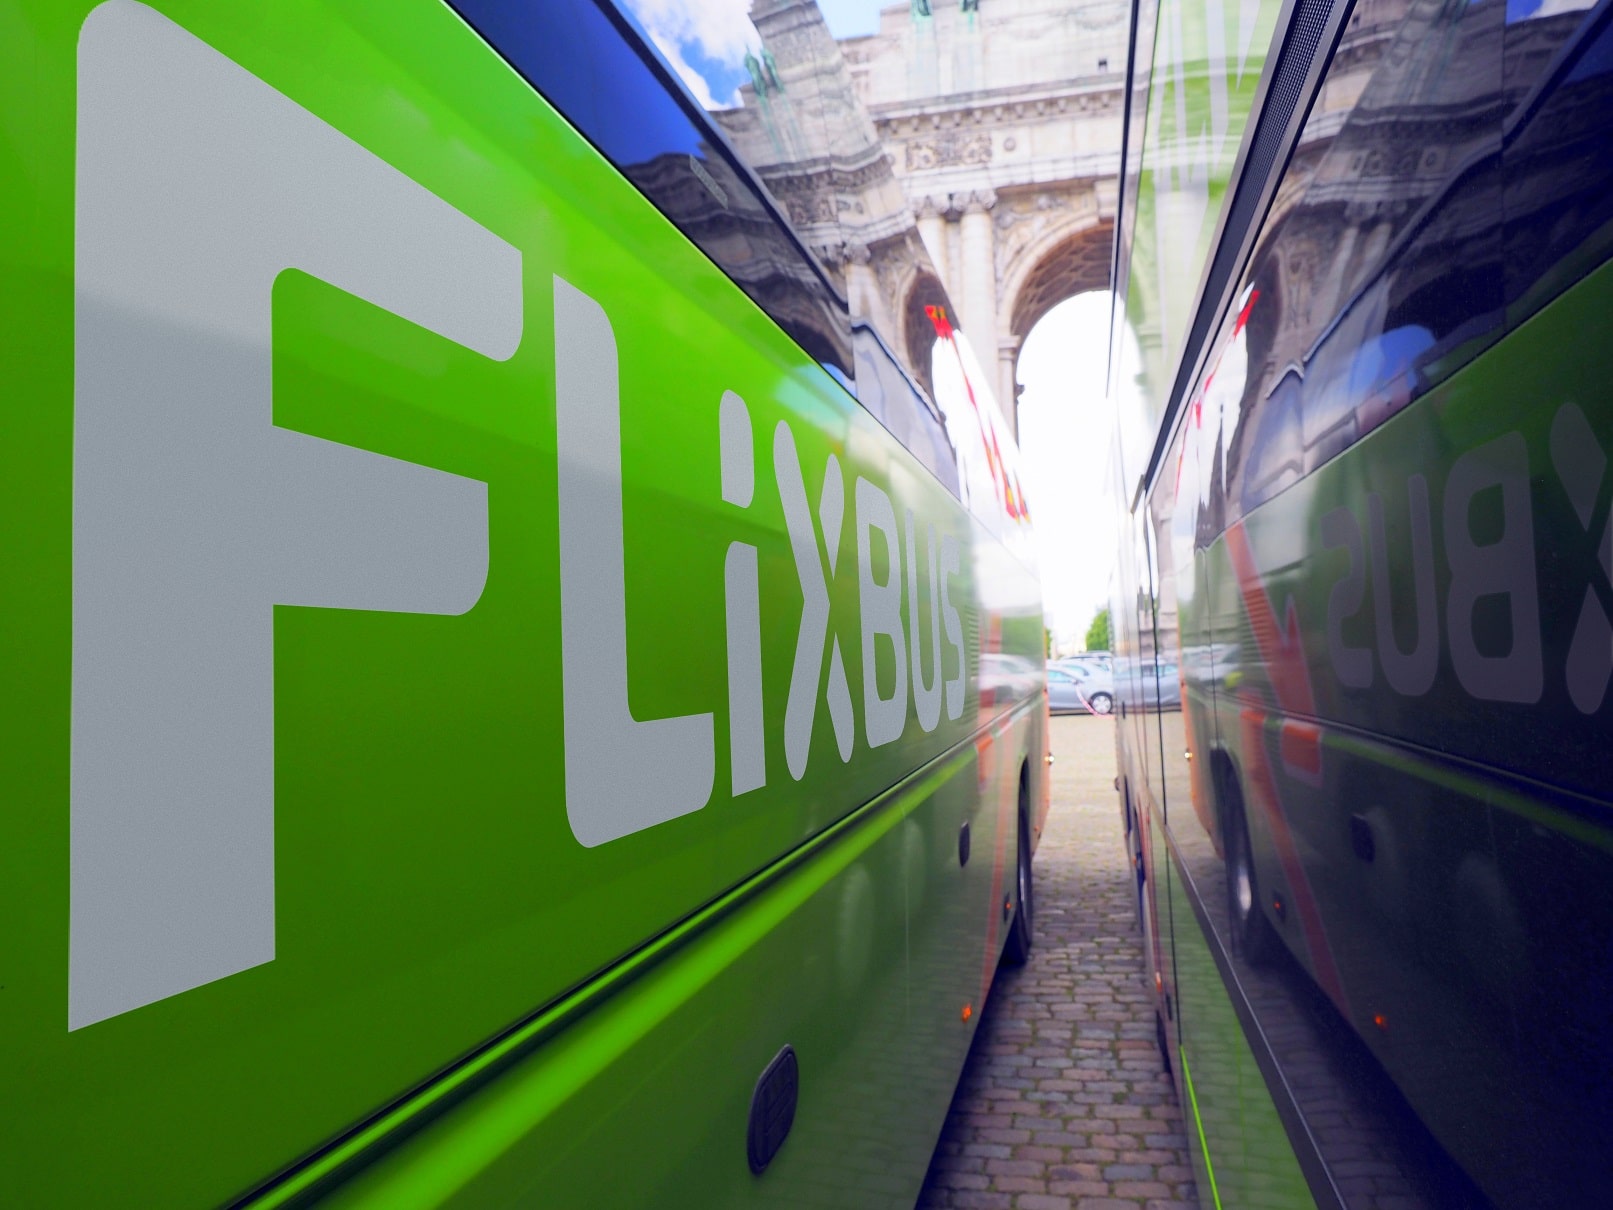 FlixBus UK: Plans to have the country's largest scheduled coach network